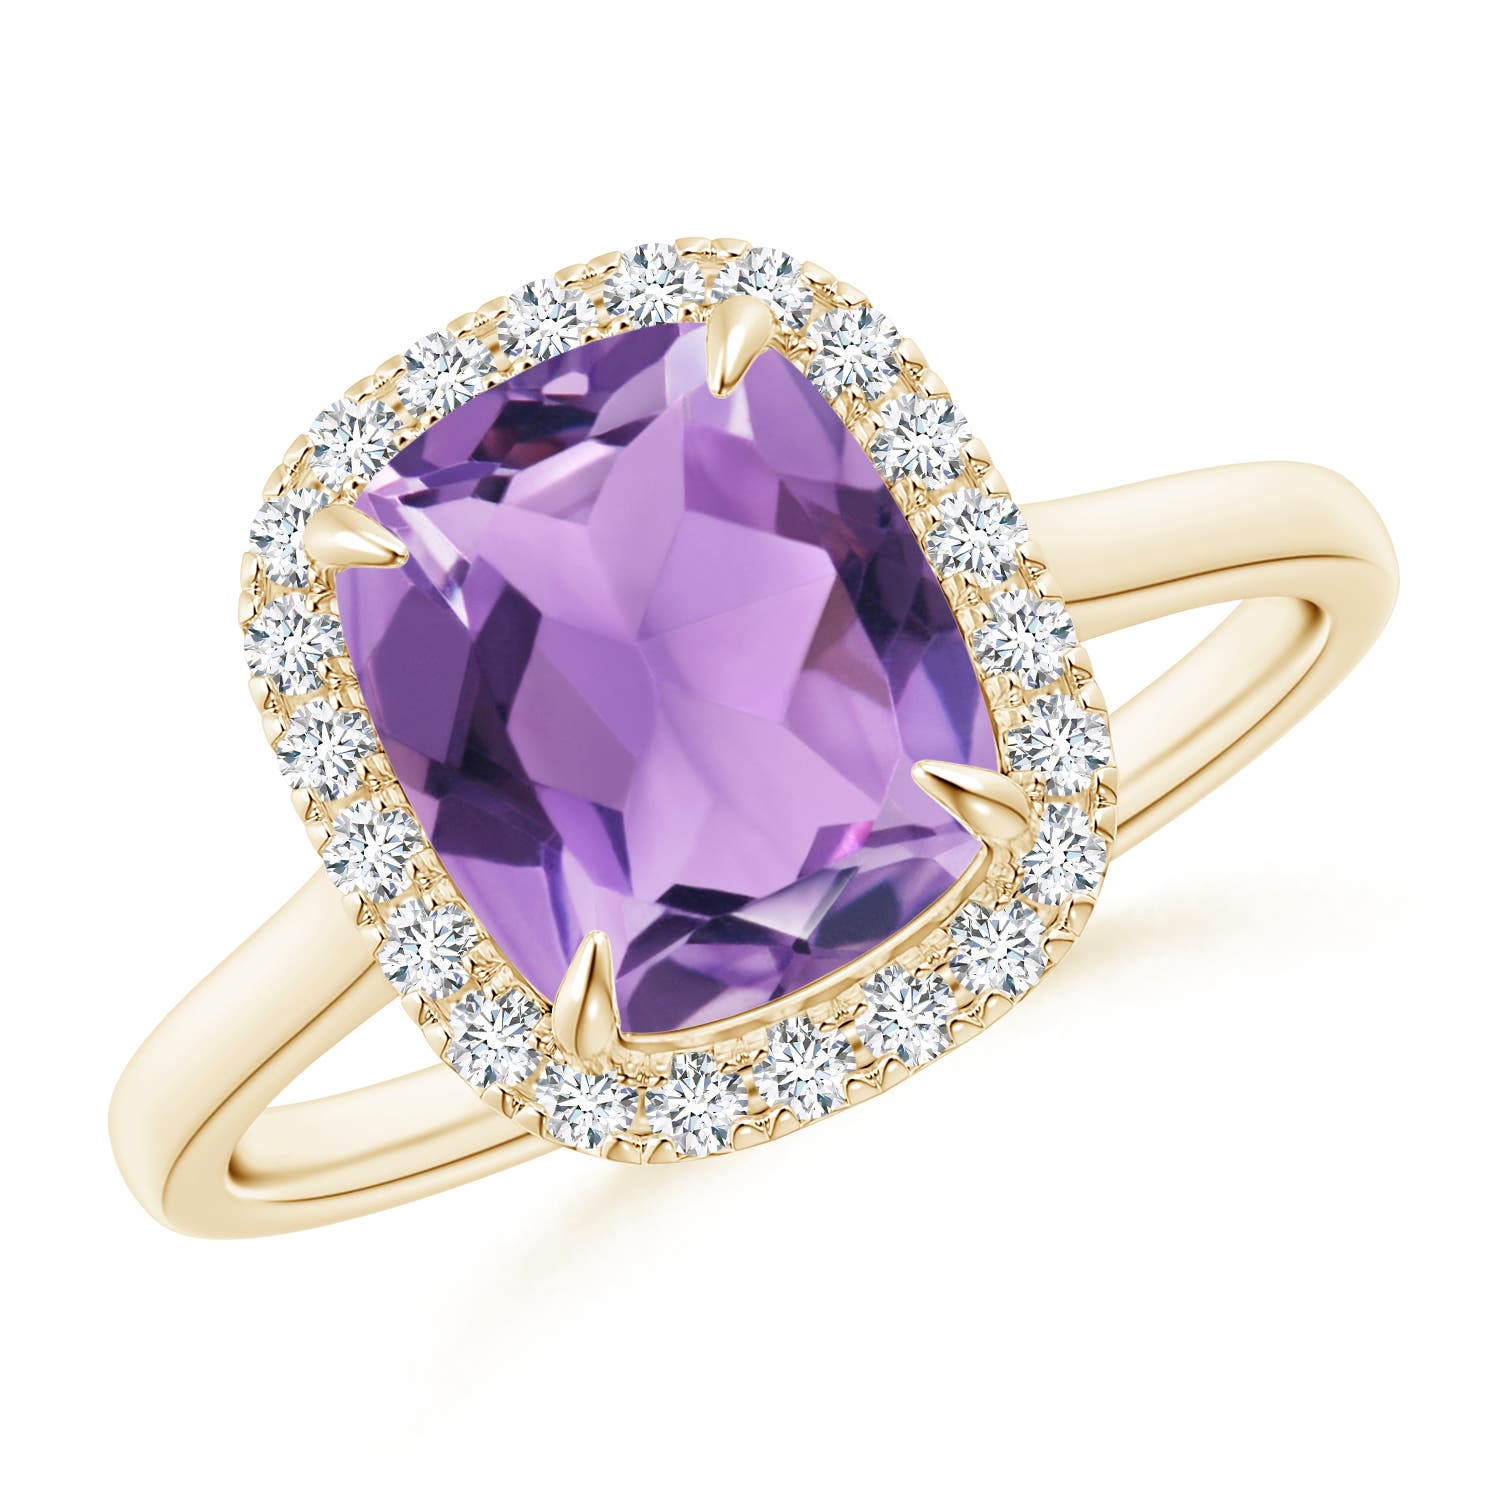 A - Amethyst / 2.22 CT / 14 KT Yellow Gold